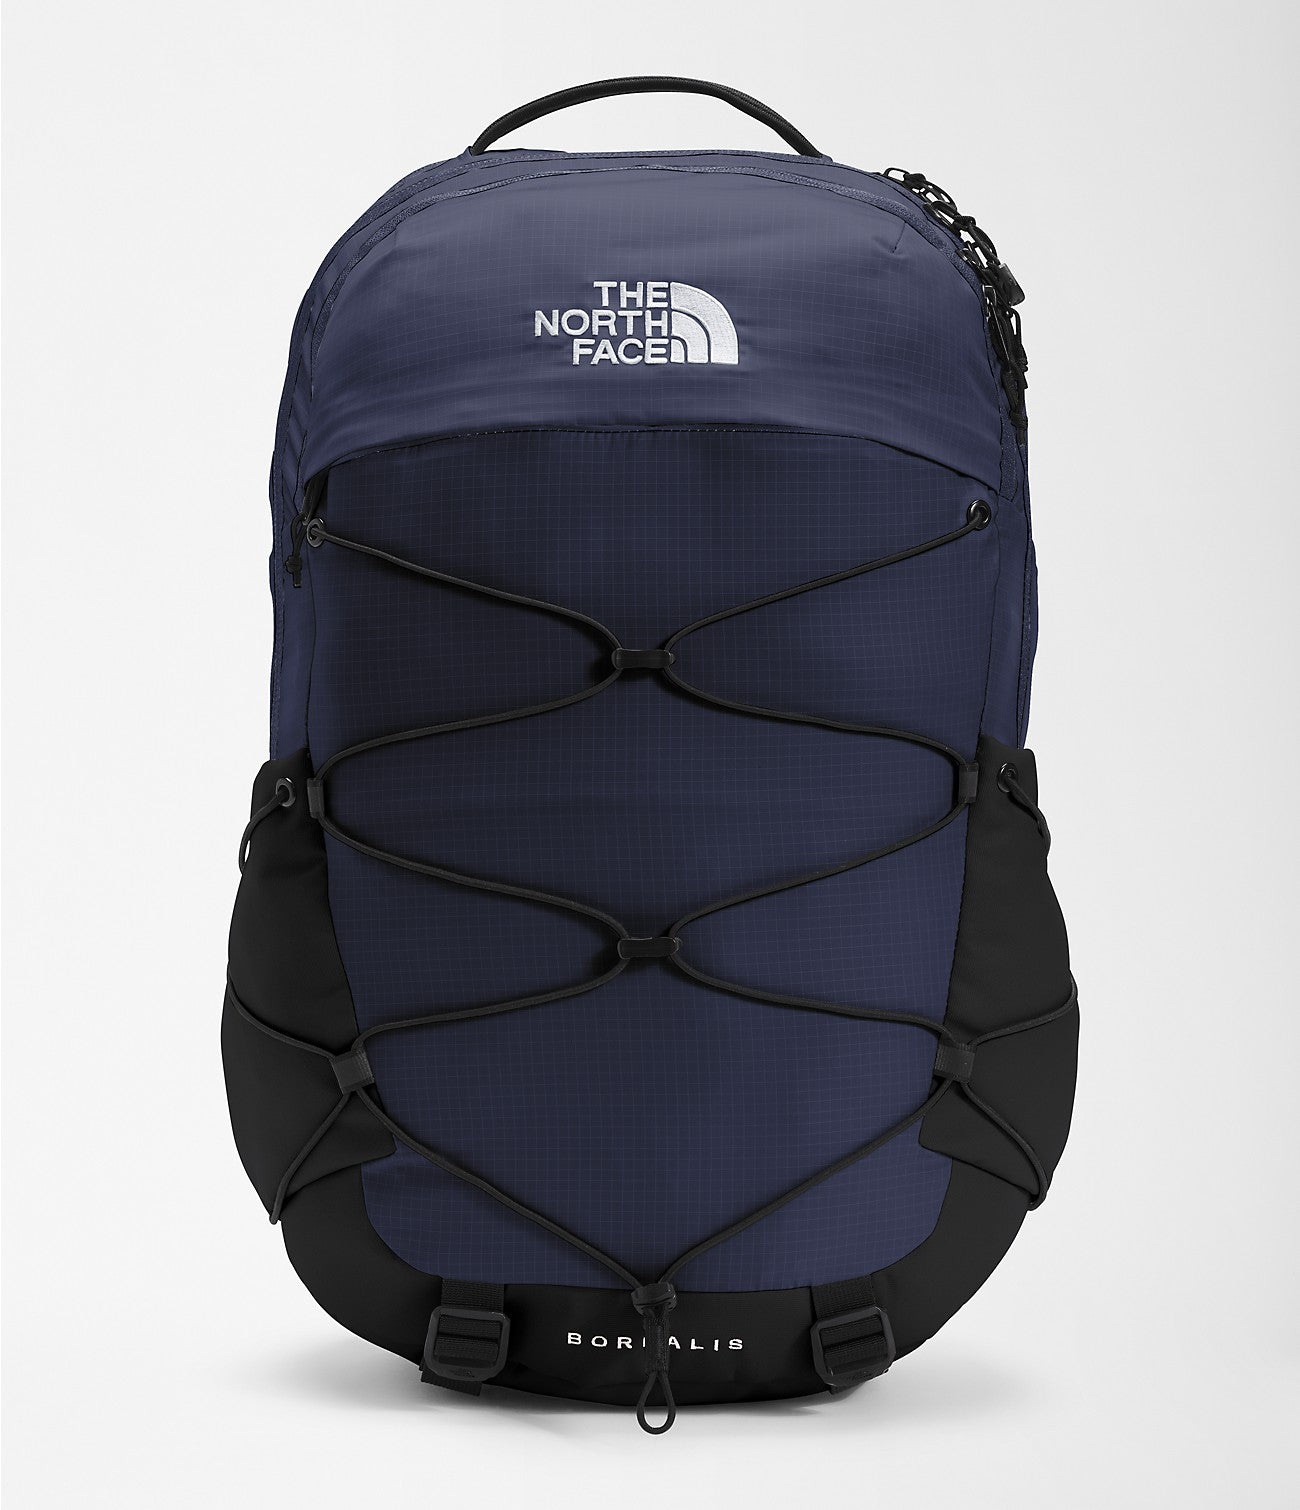 The North Face Borealis Backpack Accessories North Face TNF Navy/TNF Black-R81  